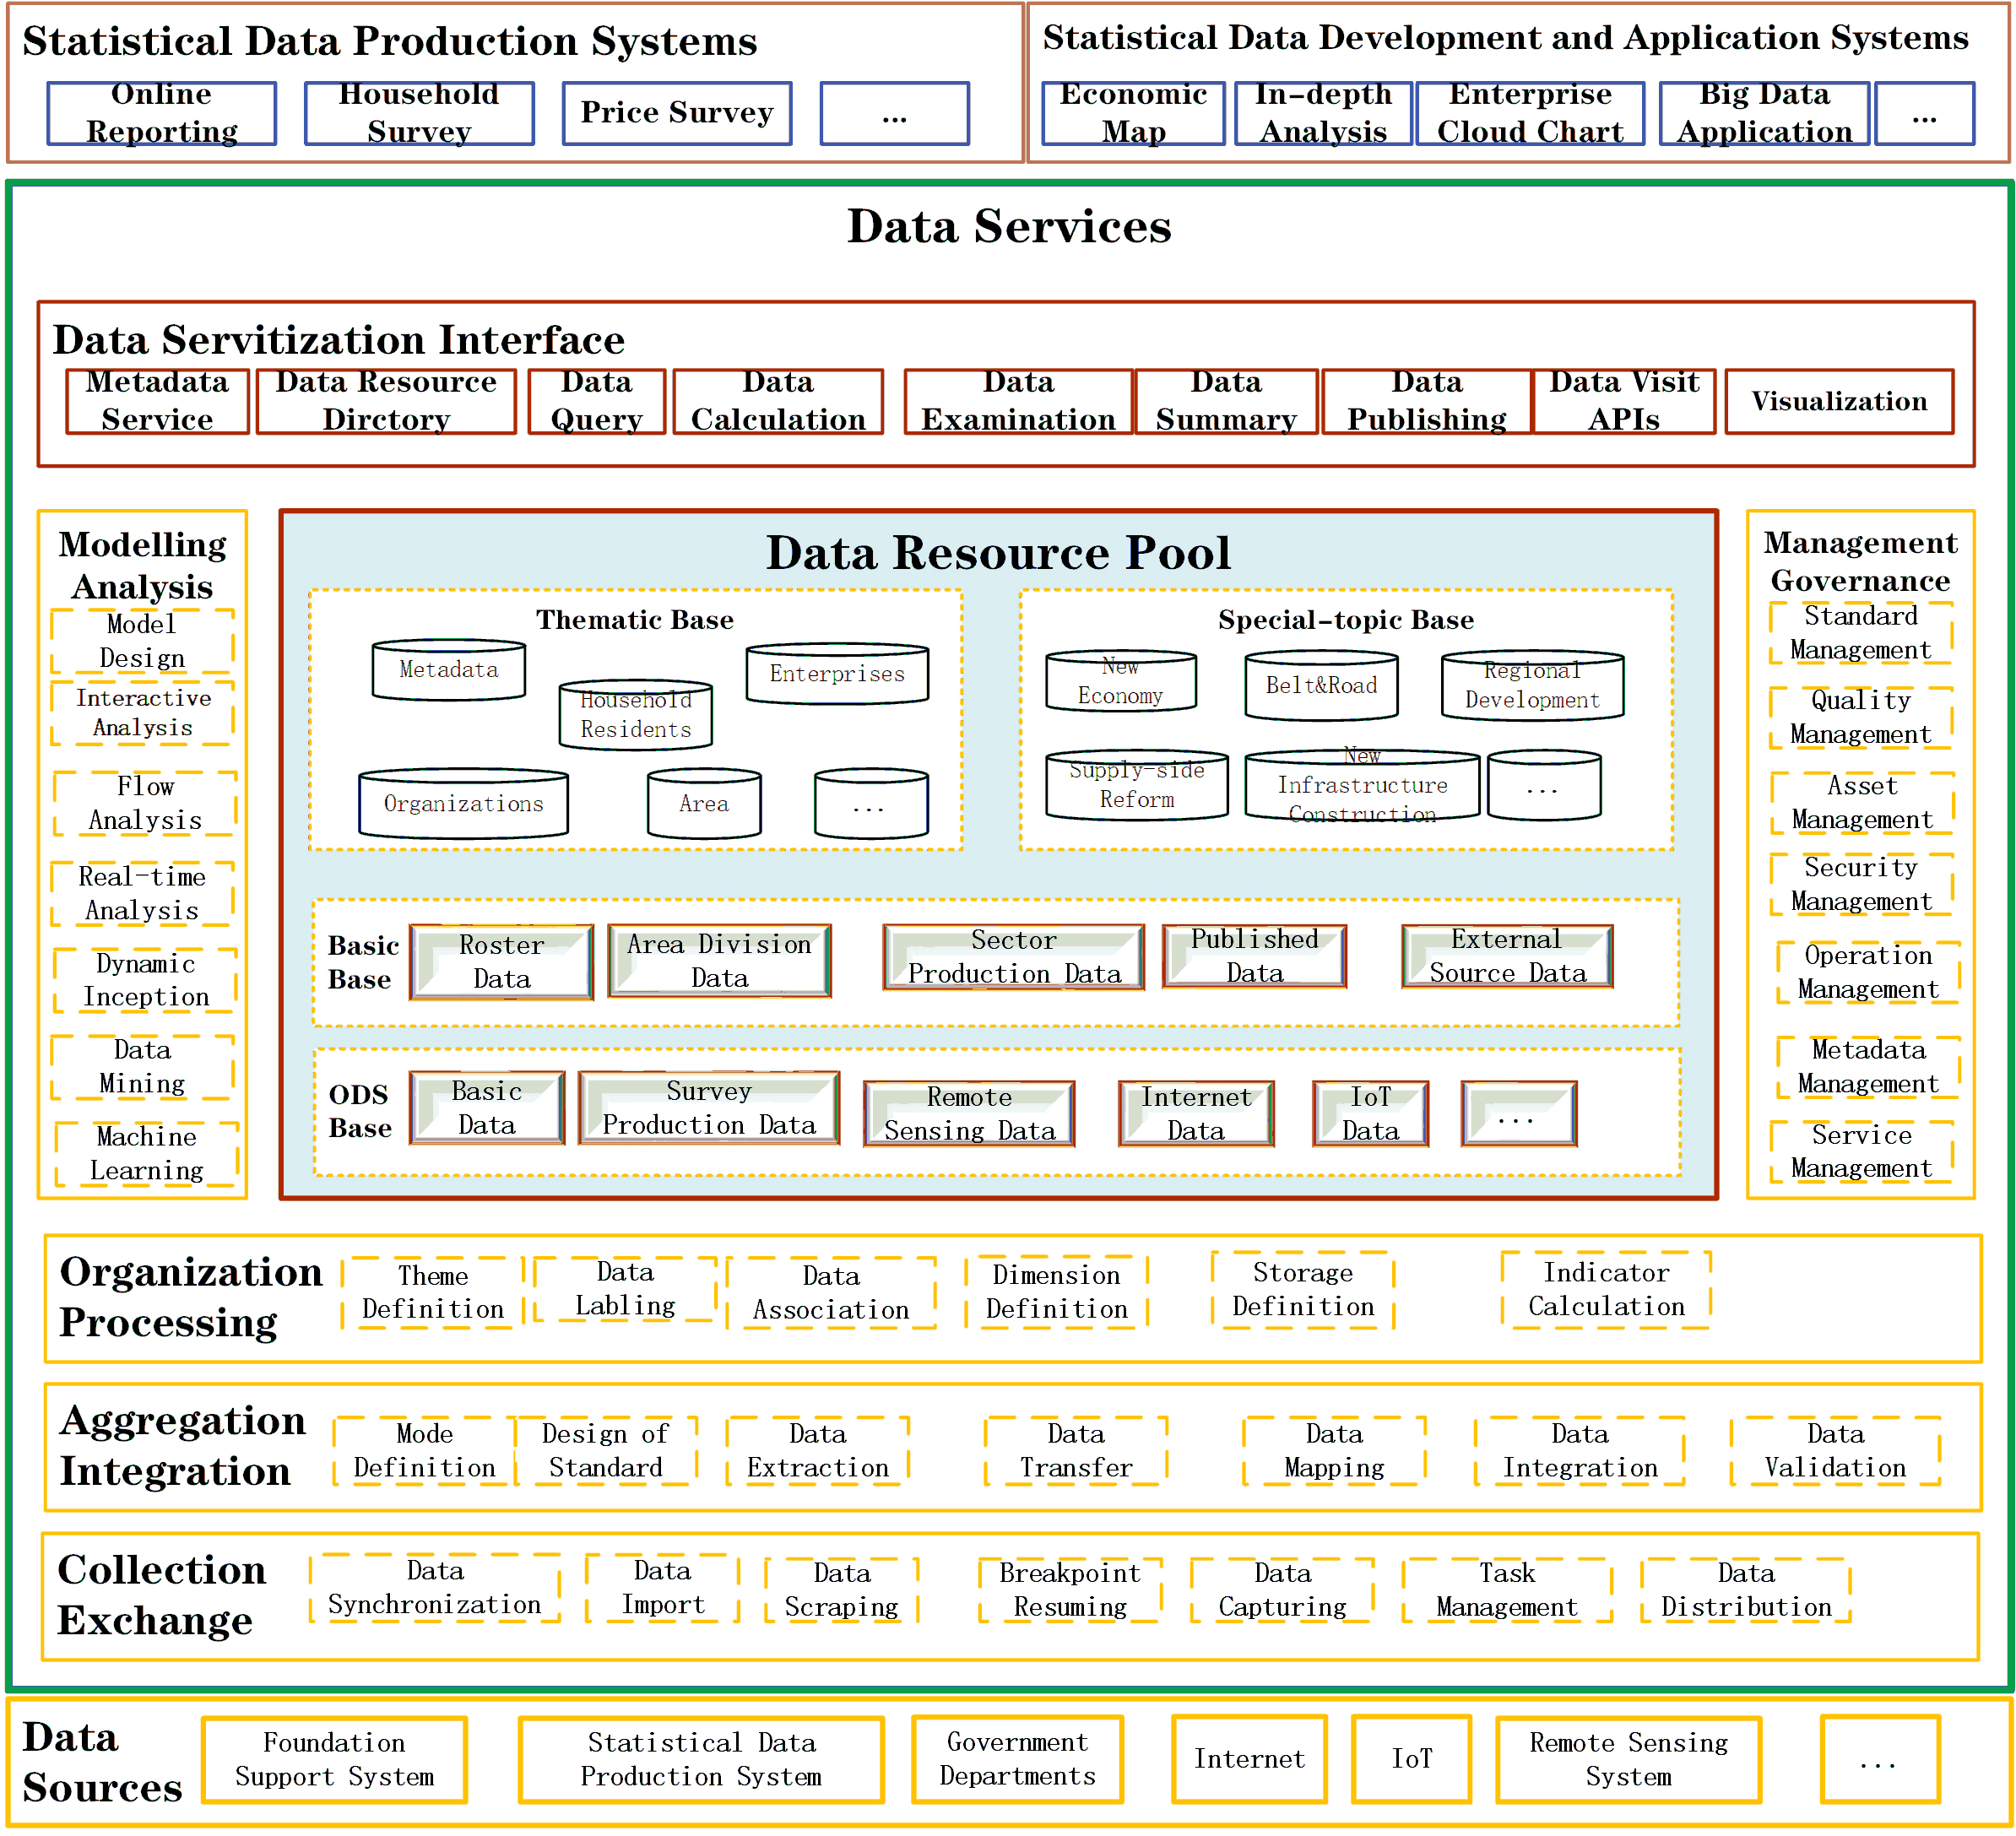 Overall functional architecture of the statistical data middle platform.